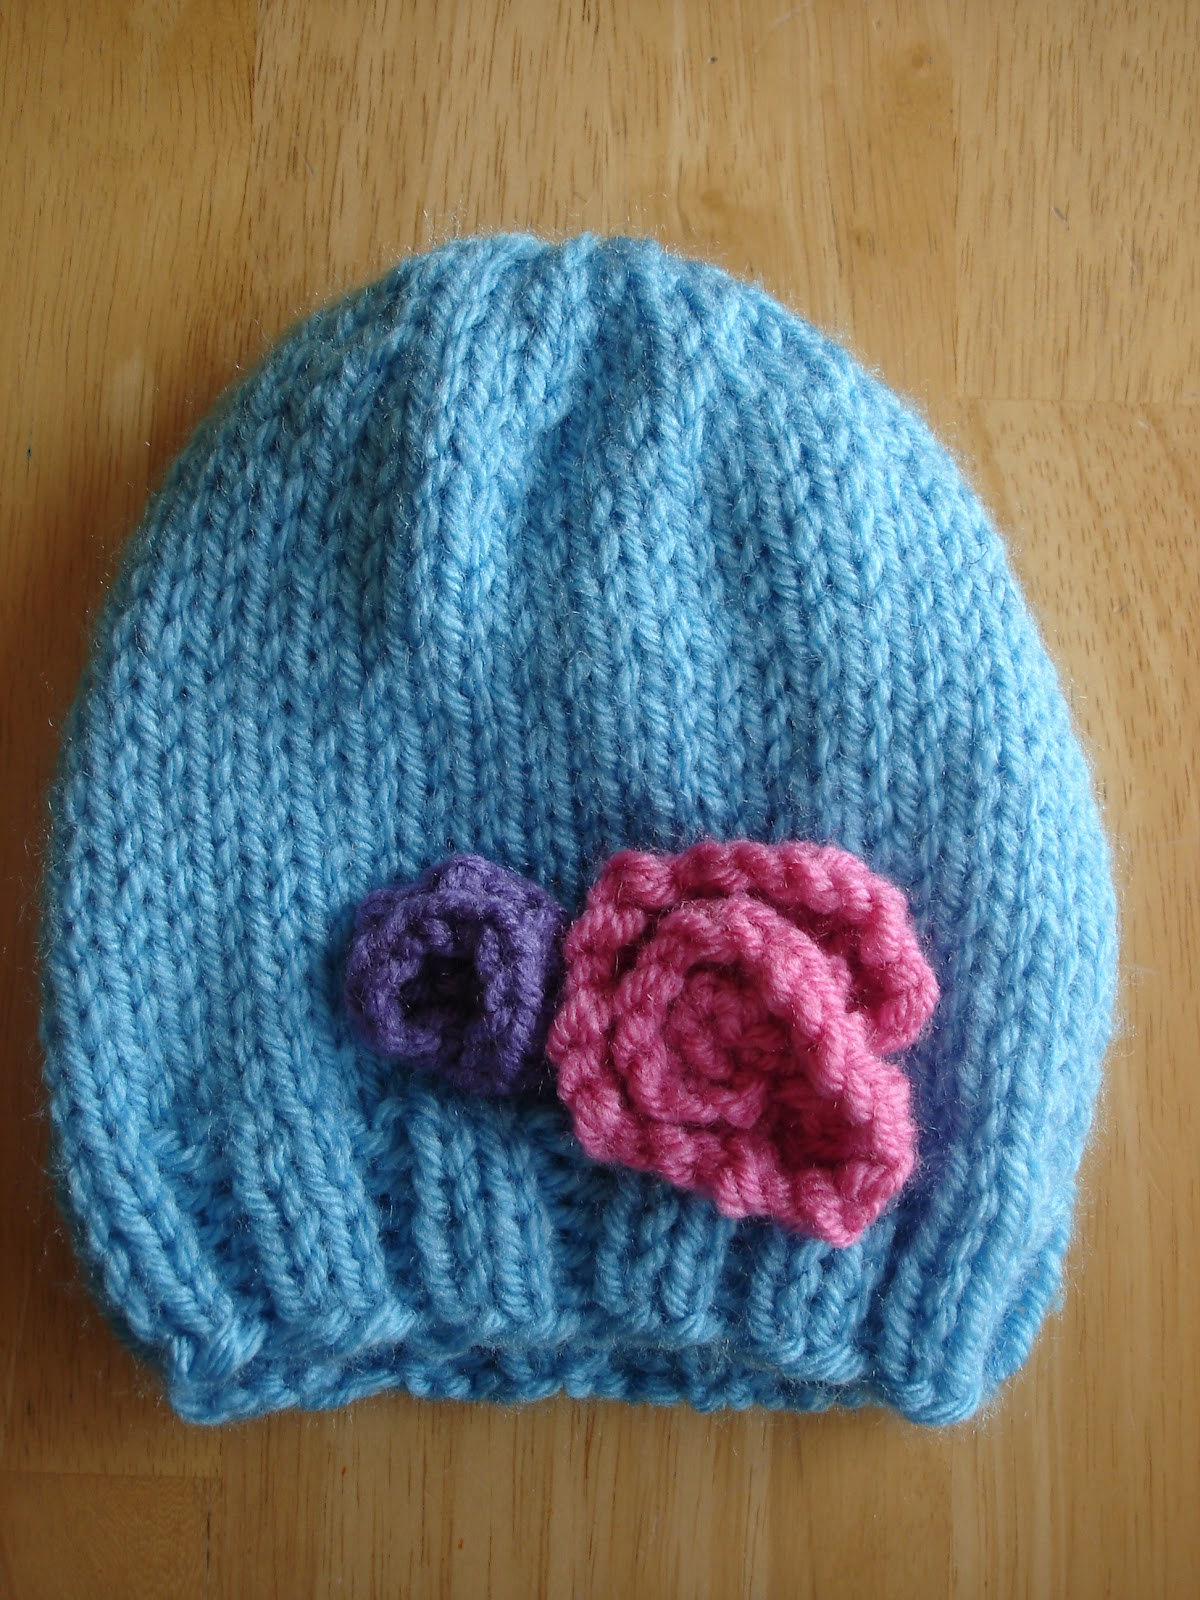 Free Knitting Patterns For Babies Hats Ba Hats Page 2 Of 3 Craft Blog Crochet Patterns